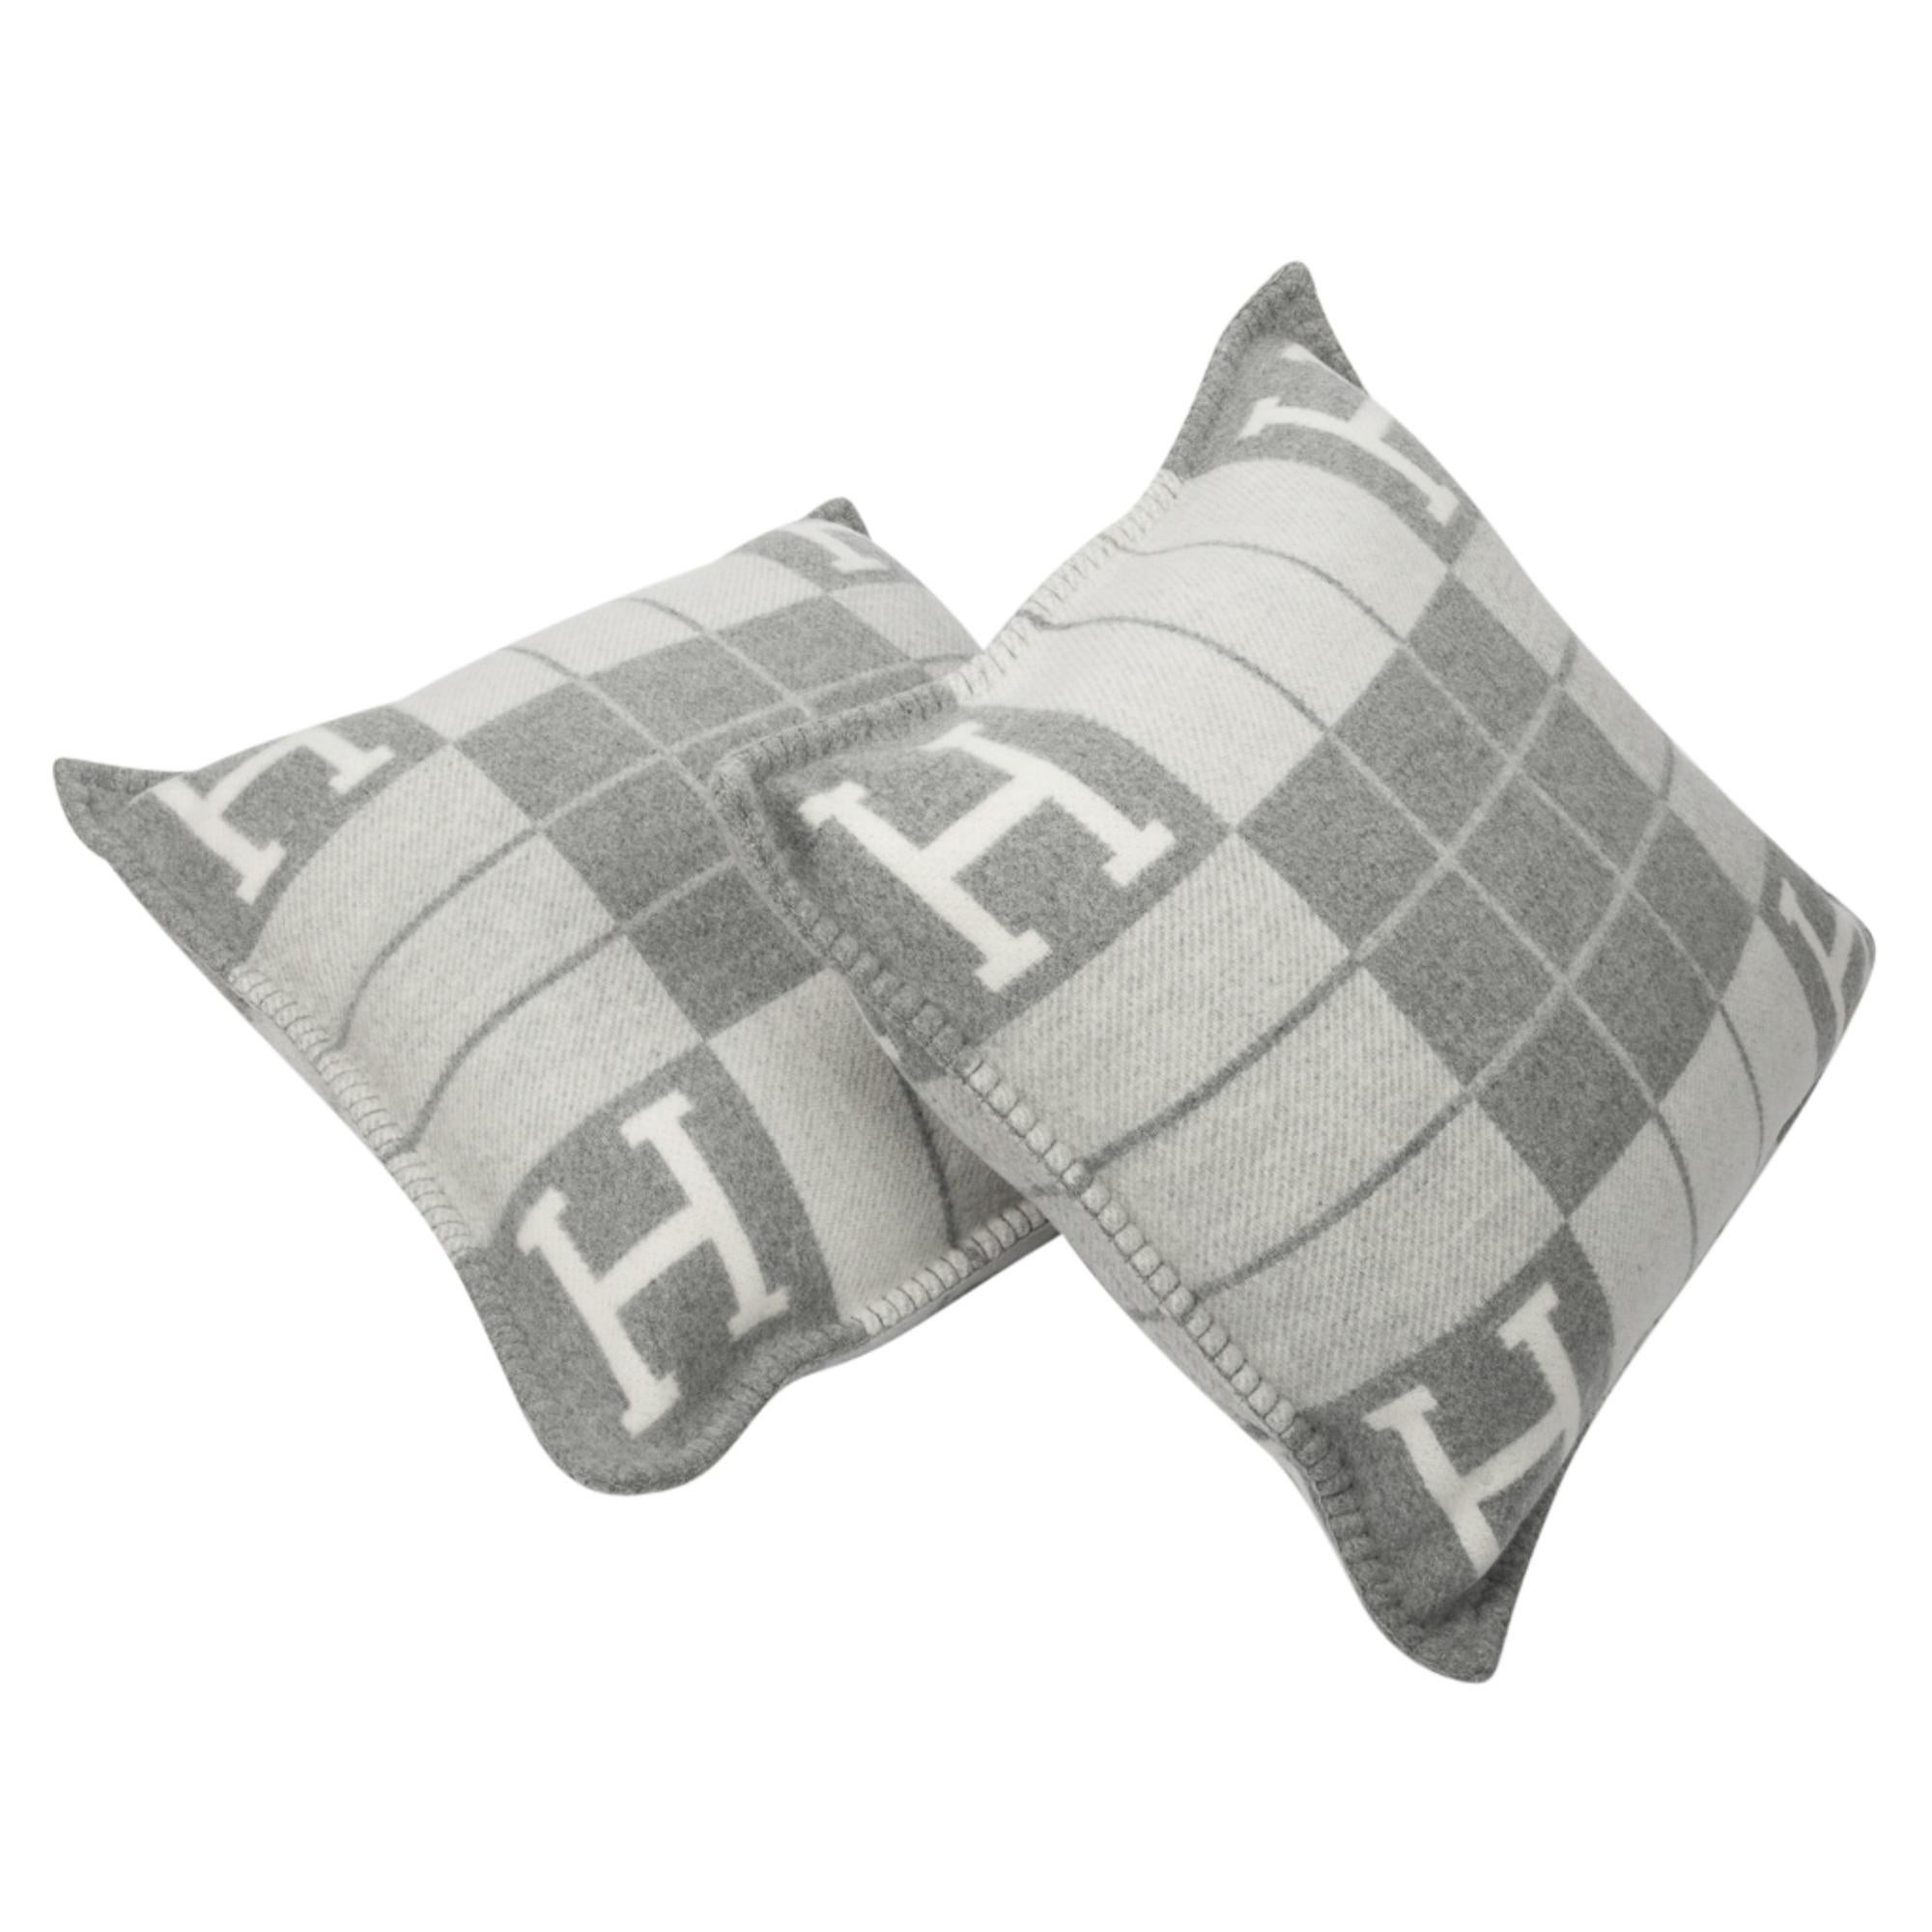 Guaranteed authentic Hermes classic PM Avalon III signature H pillow Ecru and Gris Clair.
The removable cover is created from 90% Merino Wool and 10% cashmere and has whip stitch edges.
Comes with sleeper.
New or Pristine Store Fresh Condition.